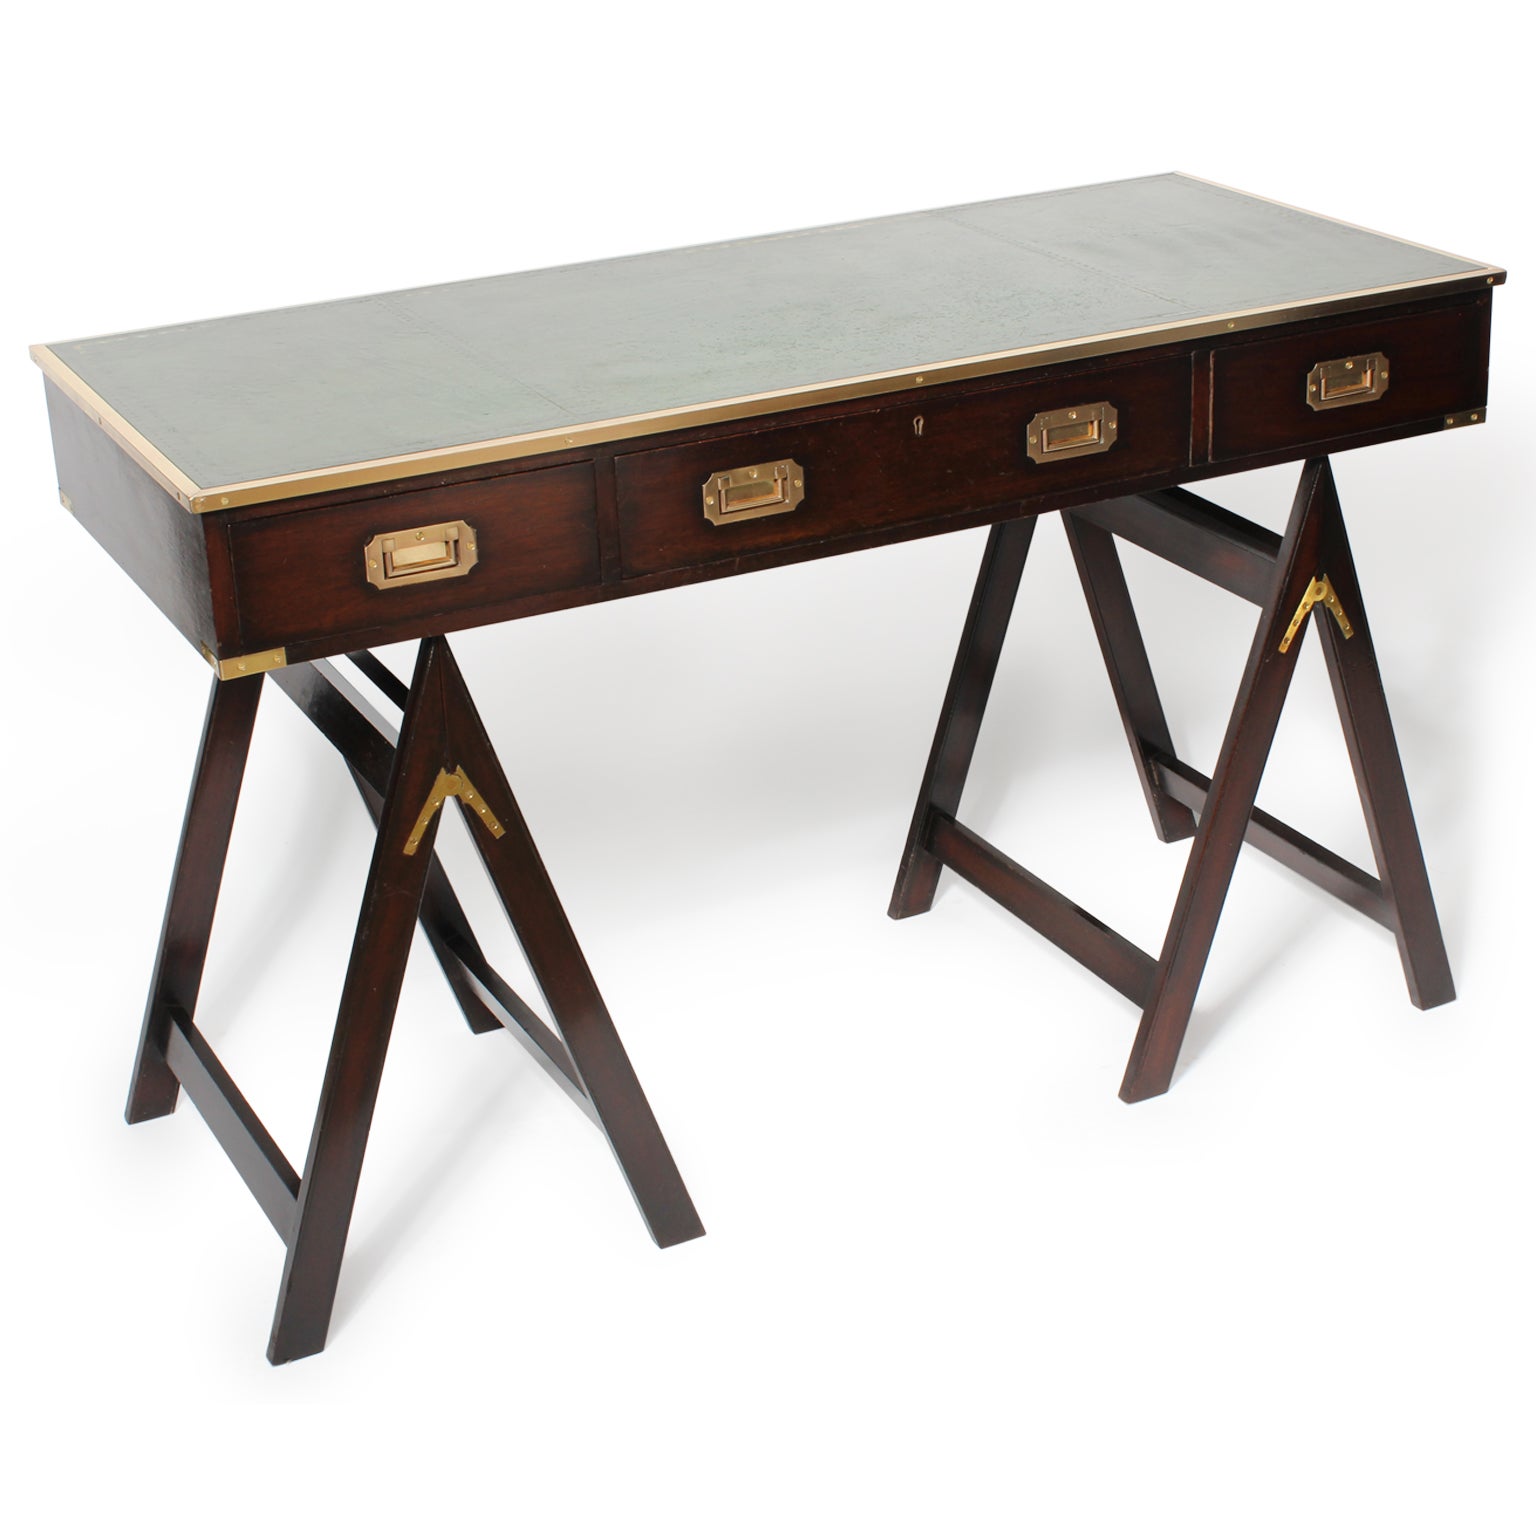 Campaign Style Desk on Sawhorse Legs: Desirable Leather Top